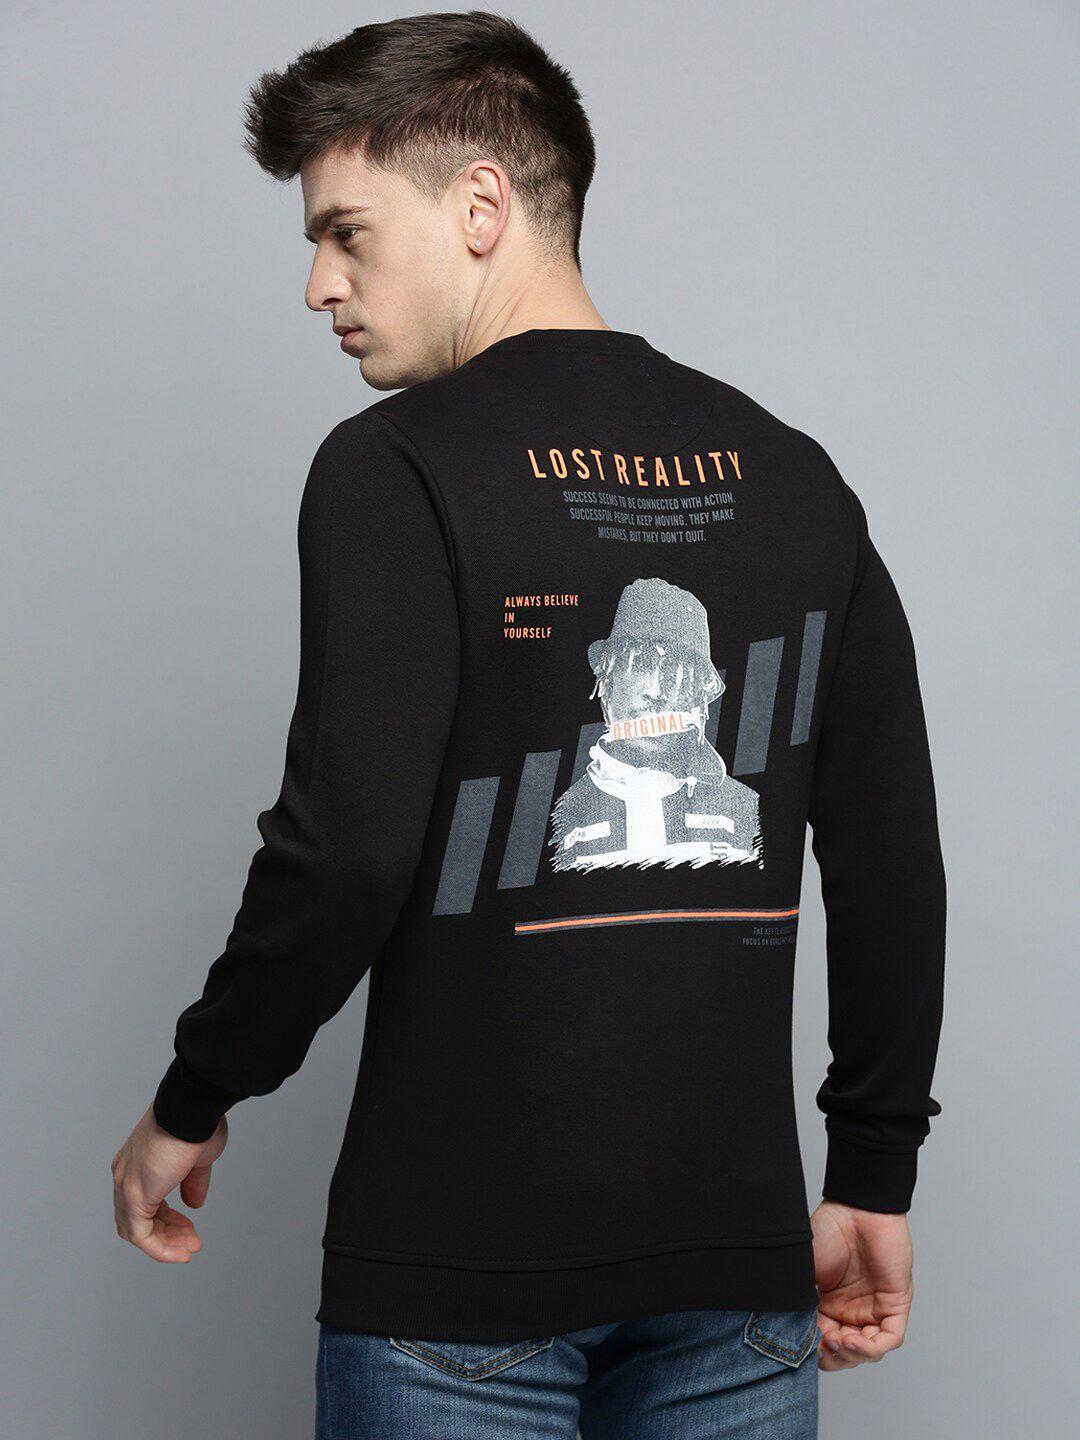 showoff printed knitted cotton sweatshirt